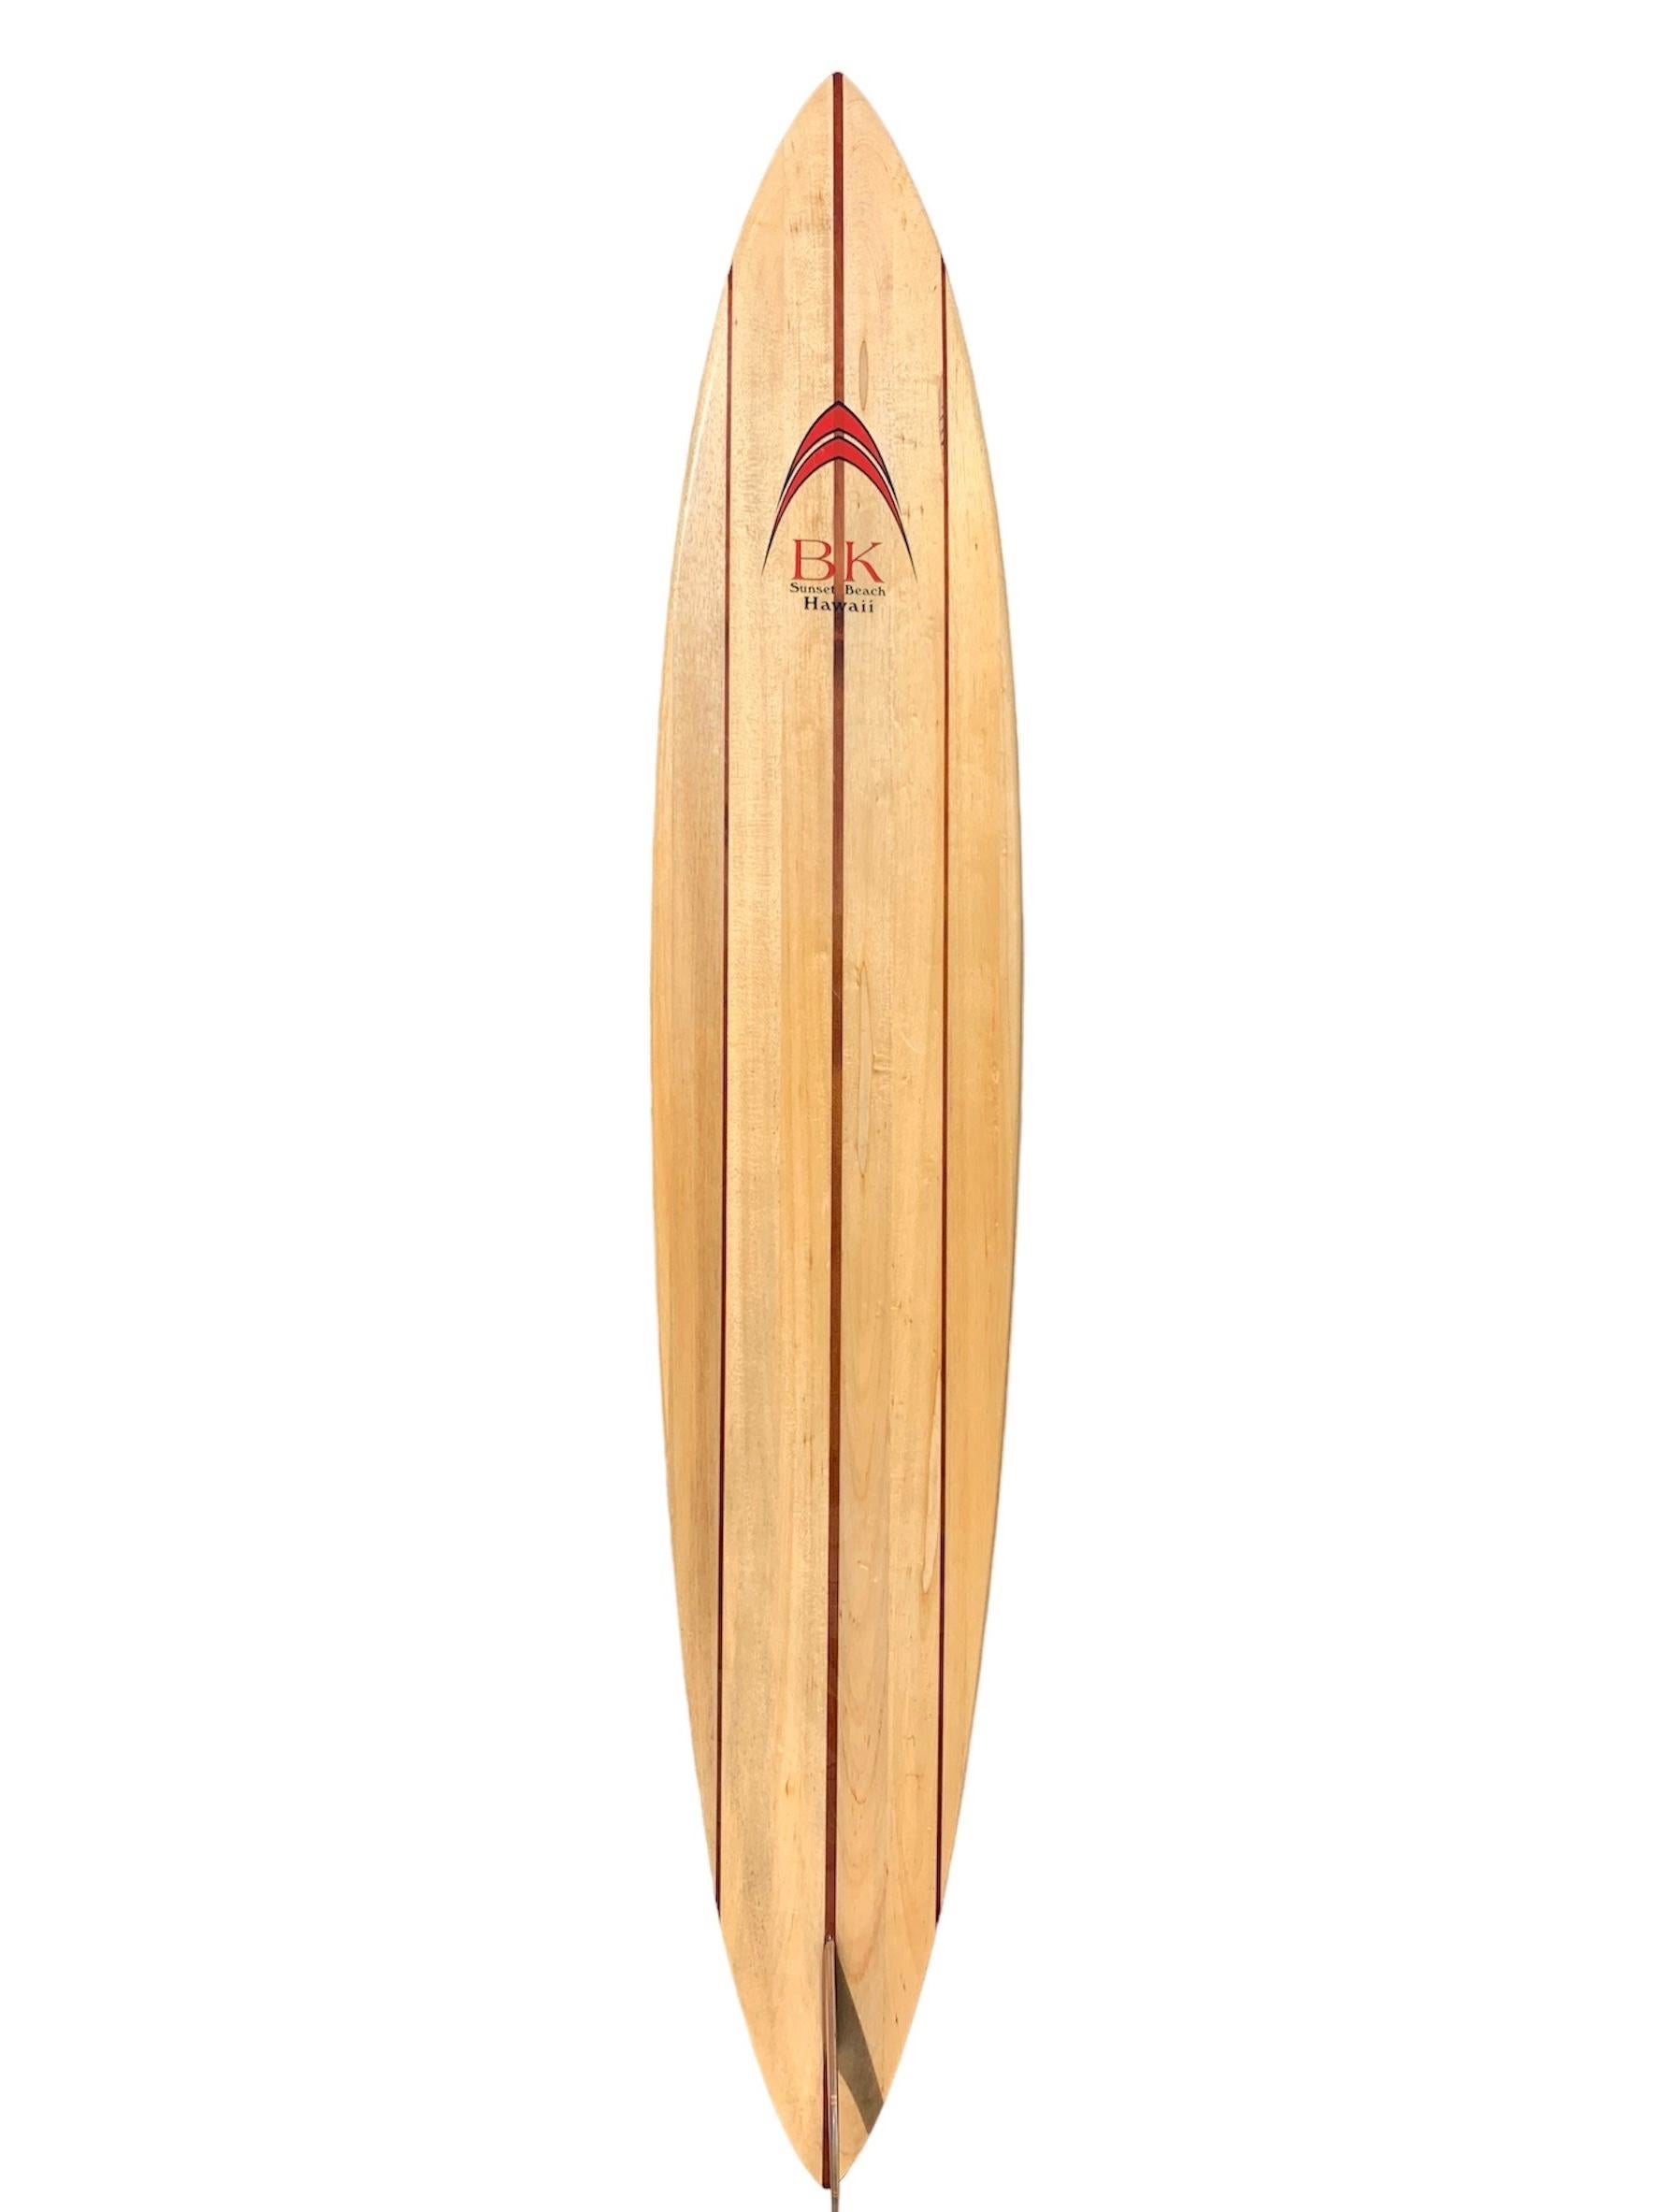 1998 Vintage Barry Kanaiaupuni balsawood pintail surfboard. Features big wave shape-design with triple redwood stringers and remarkable 17 piece wood fin. An amazing example of a big wave balsa surfboard shaped by the renowned Hawaiian surfer, Barry